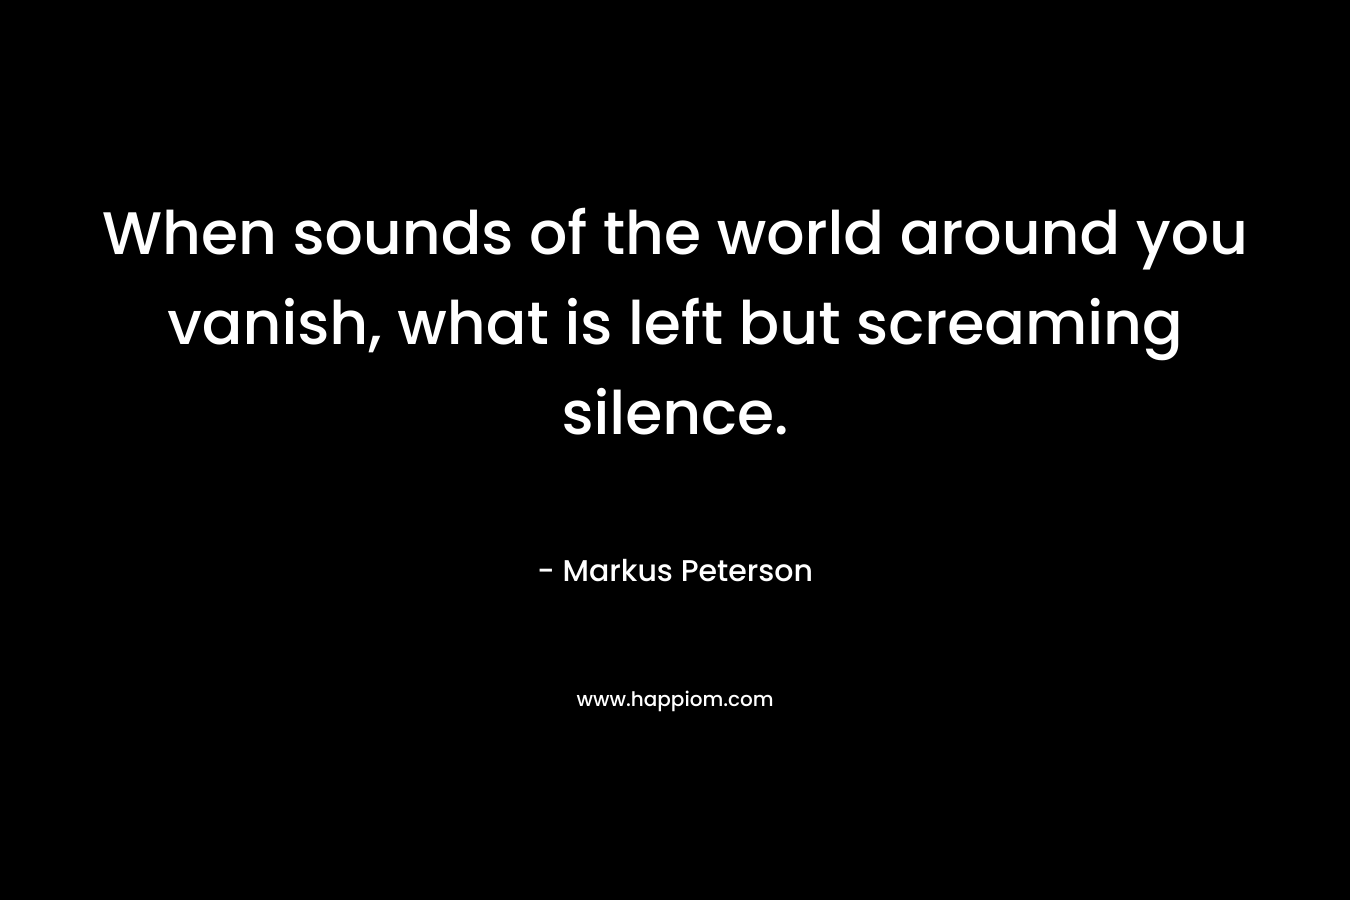 When sounds of the world around you vanish, what is left but screaming silence. – Markus Peterson